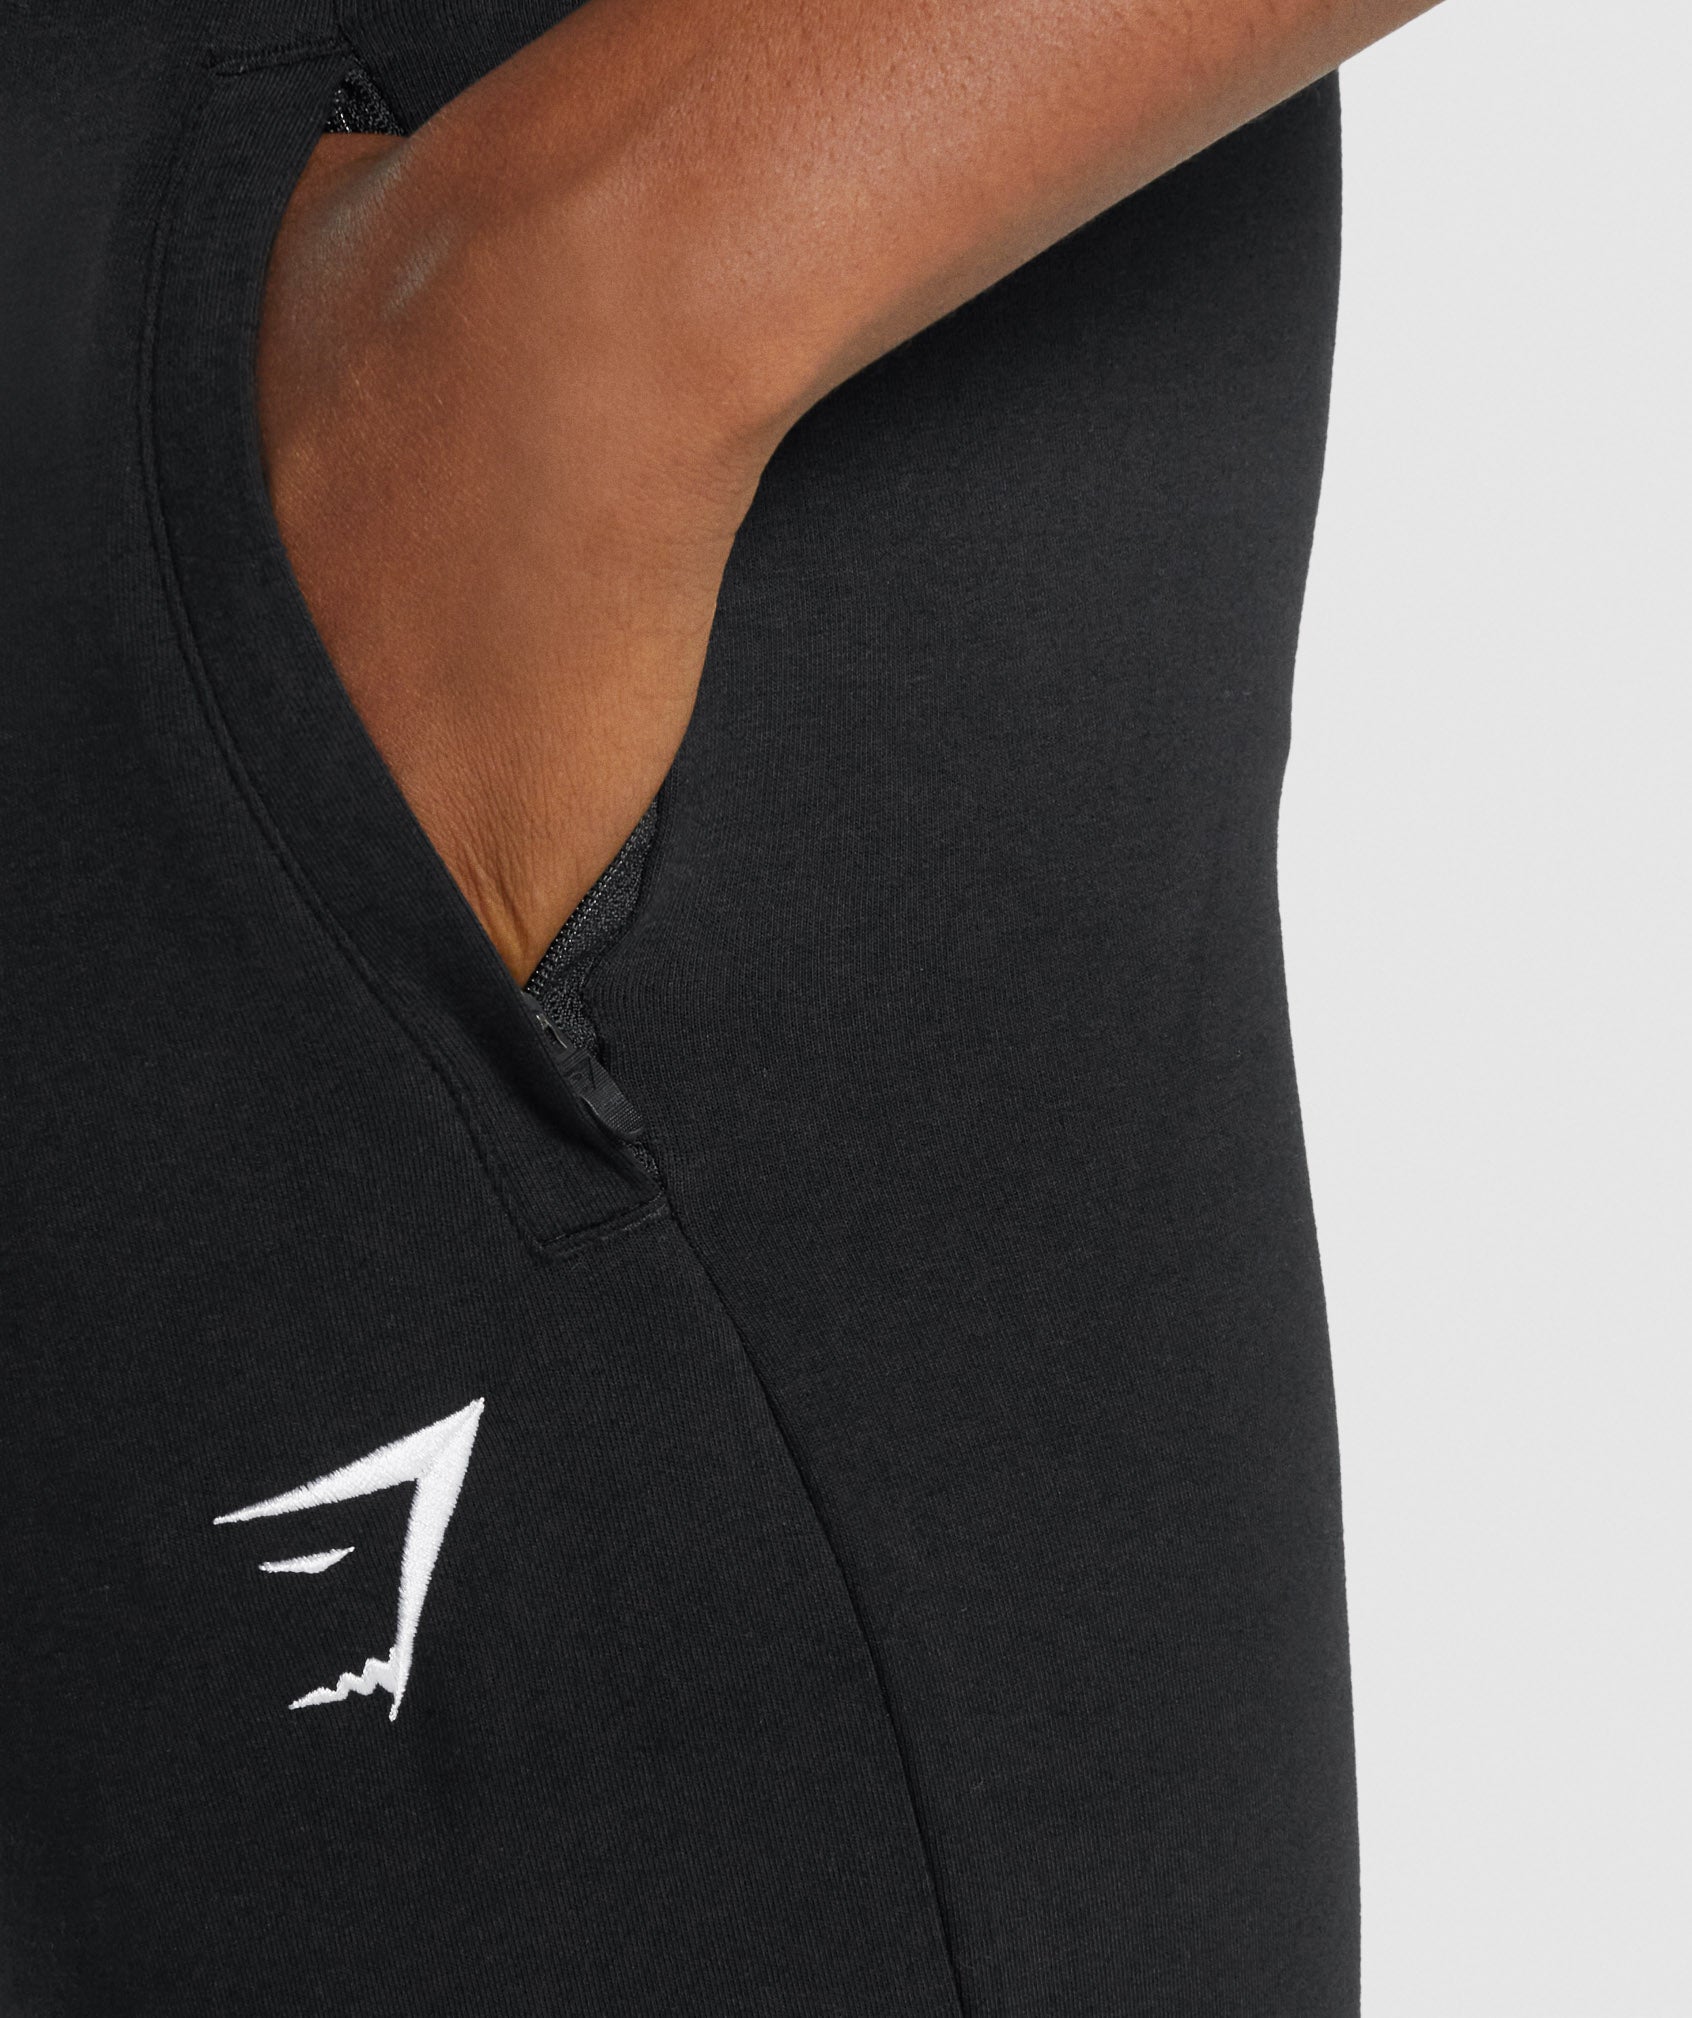 Gymshark Crest Joggers Black Size M - $20 (33% Off Retail) - From